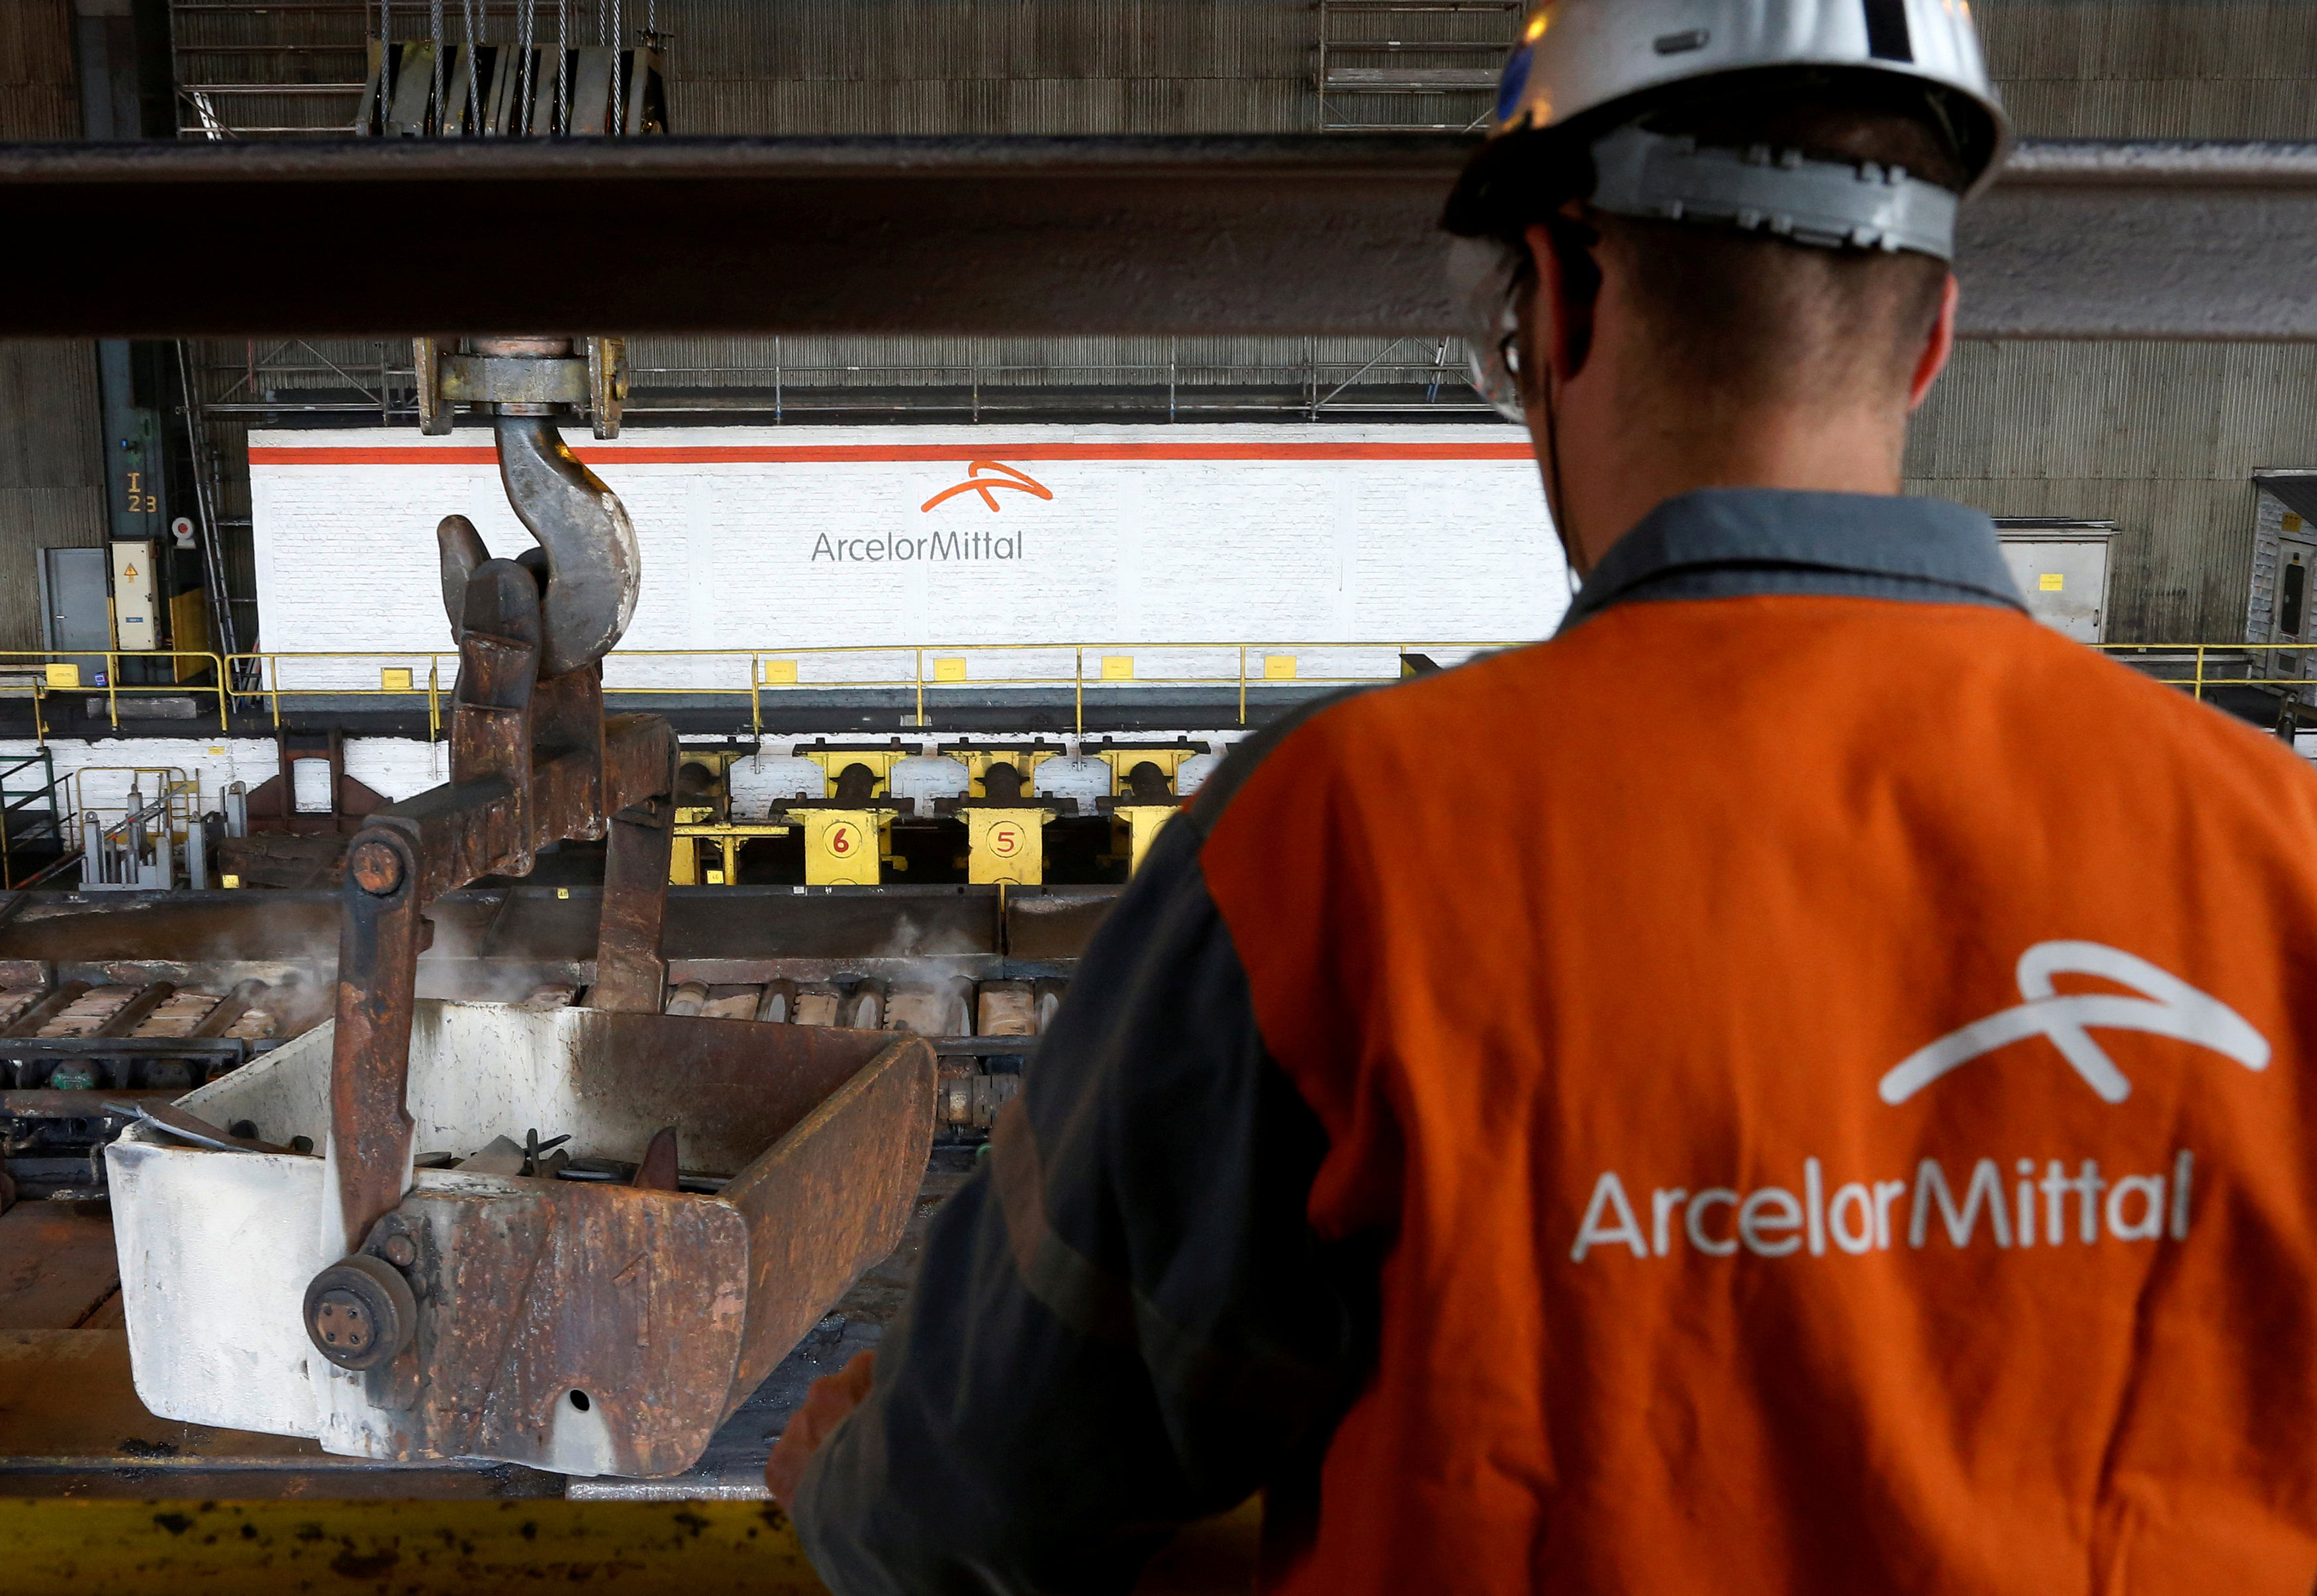 A worker surveys the production process at the ArcelorMittal steel plant. (Reuters Photo)